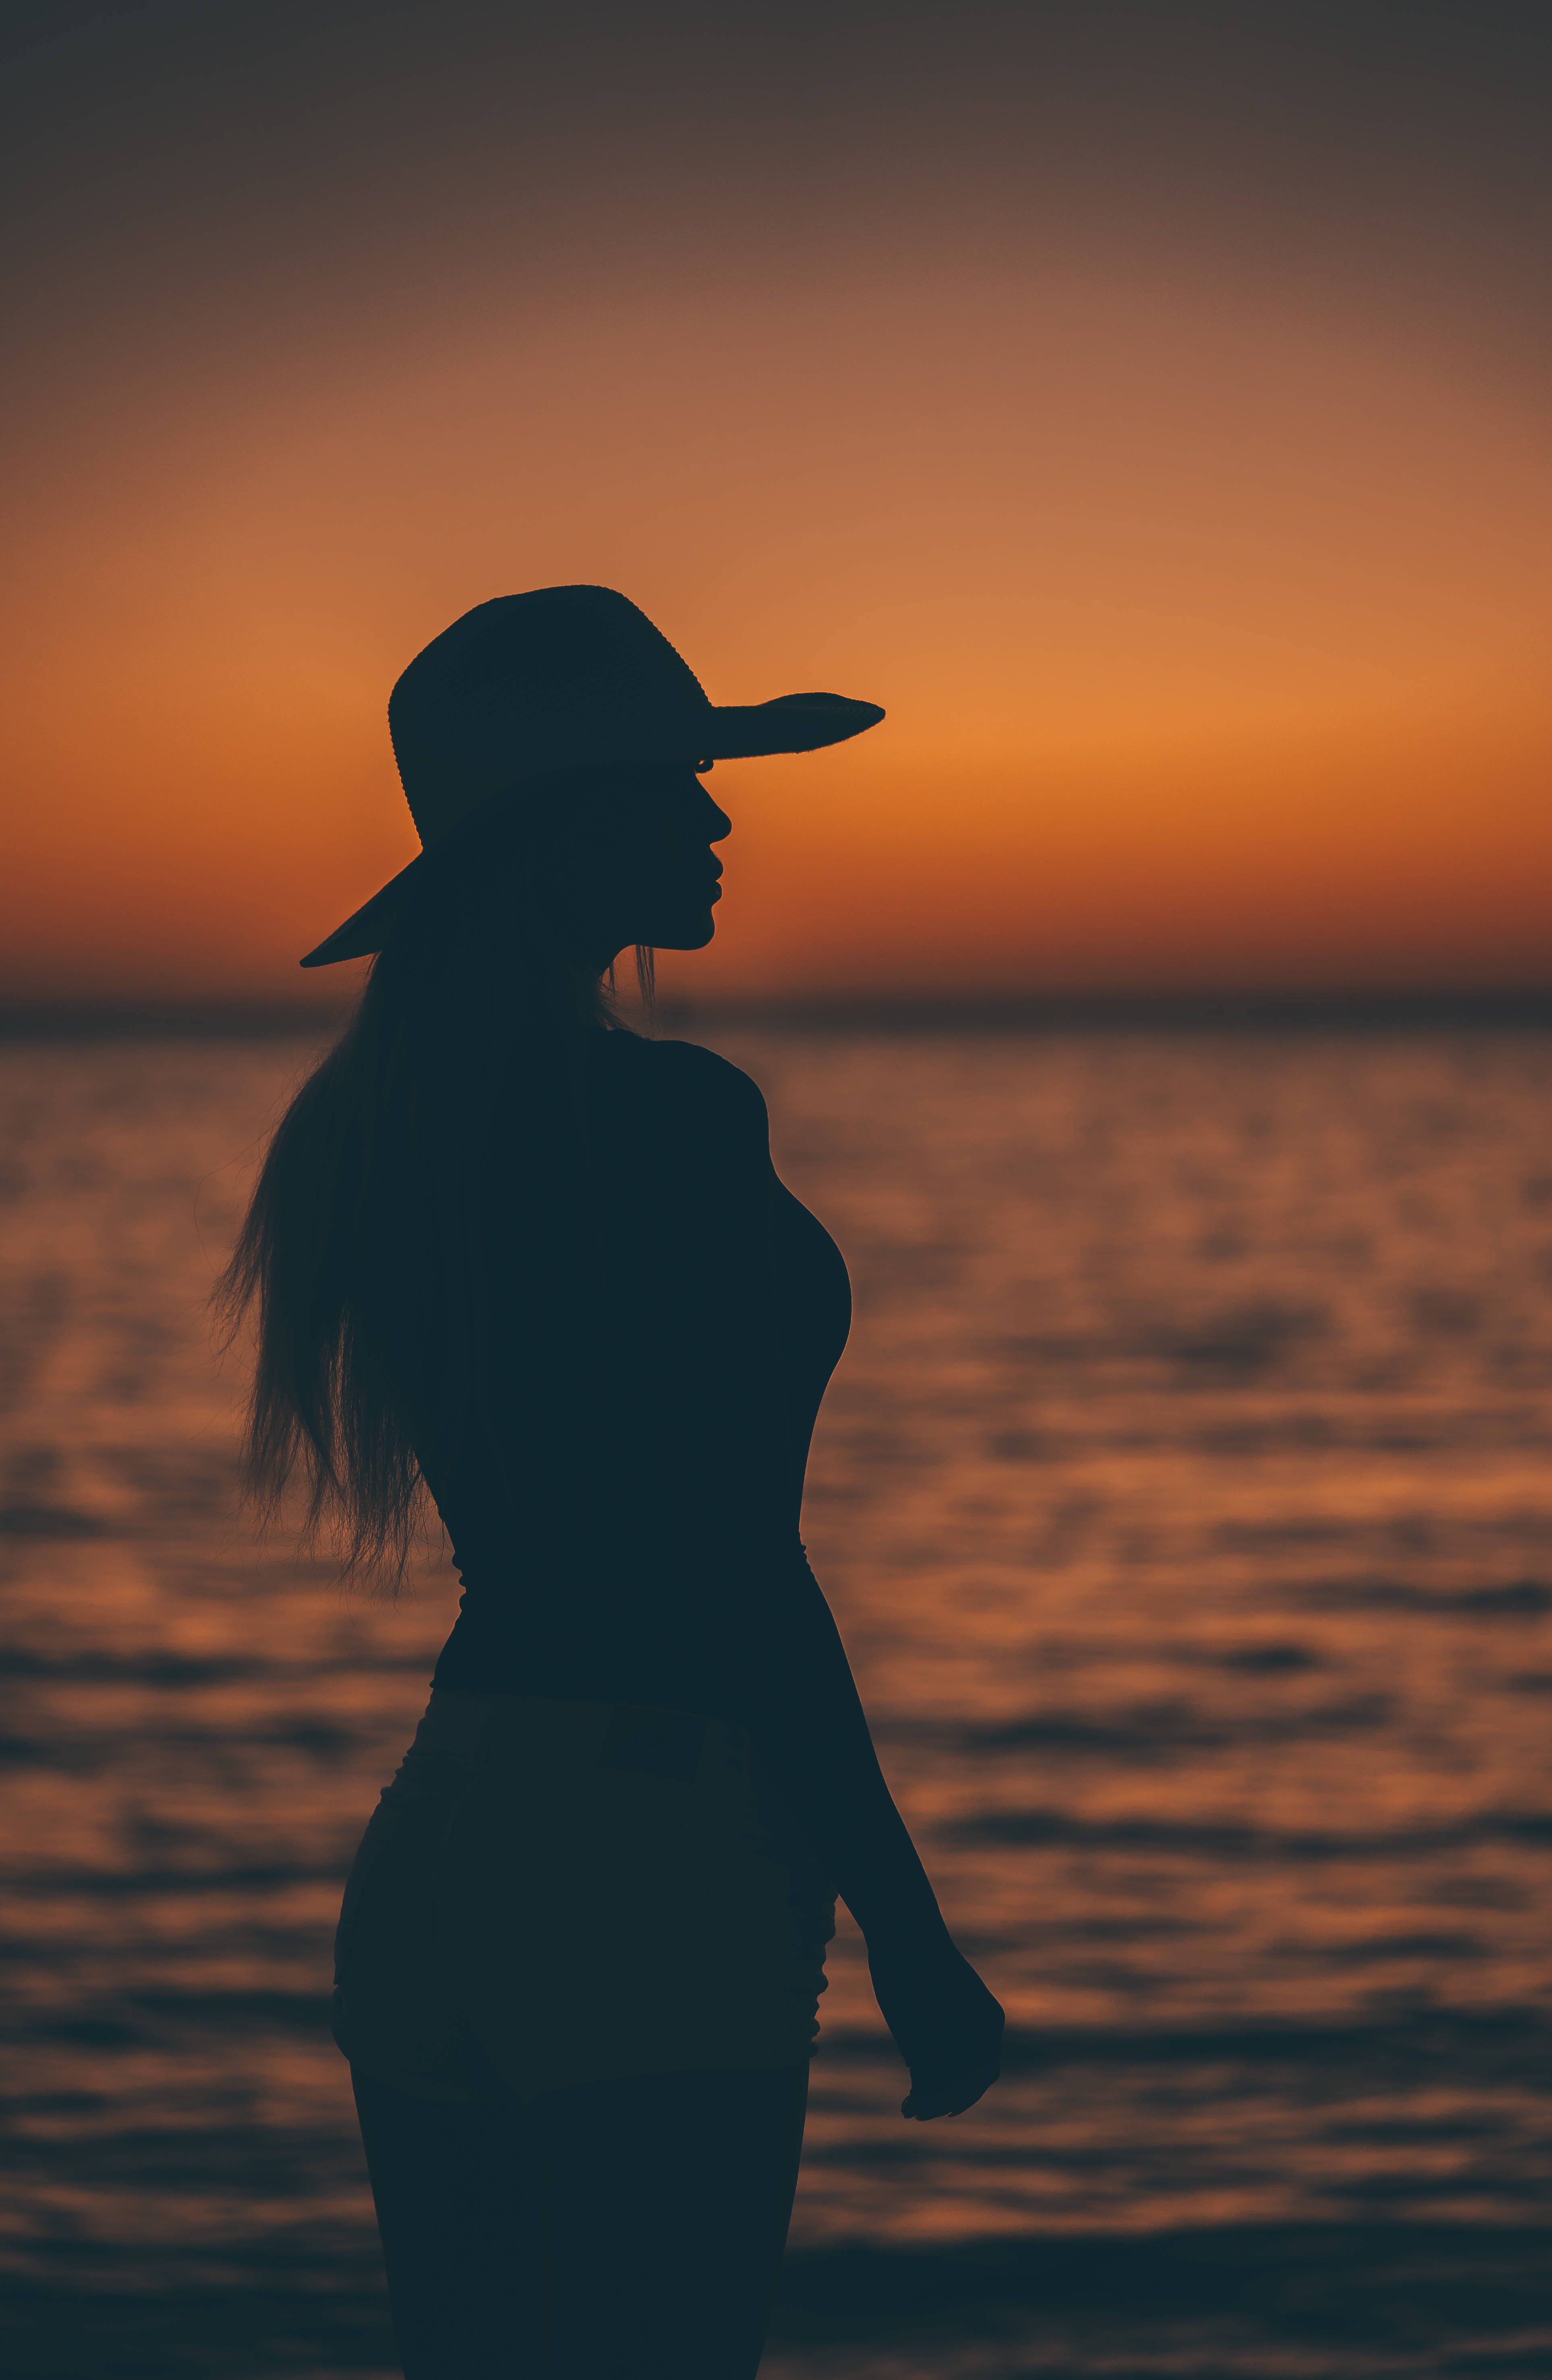 A woman's silhouette against the backdrop of a beautiful sunset - Sunset